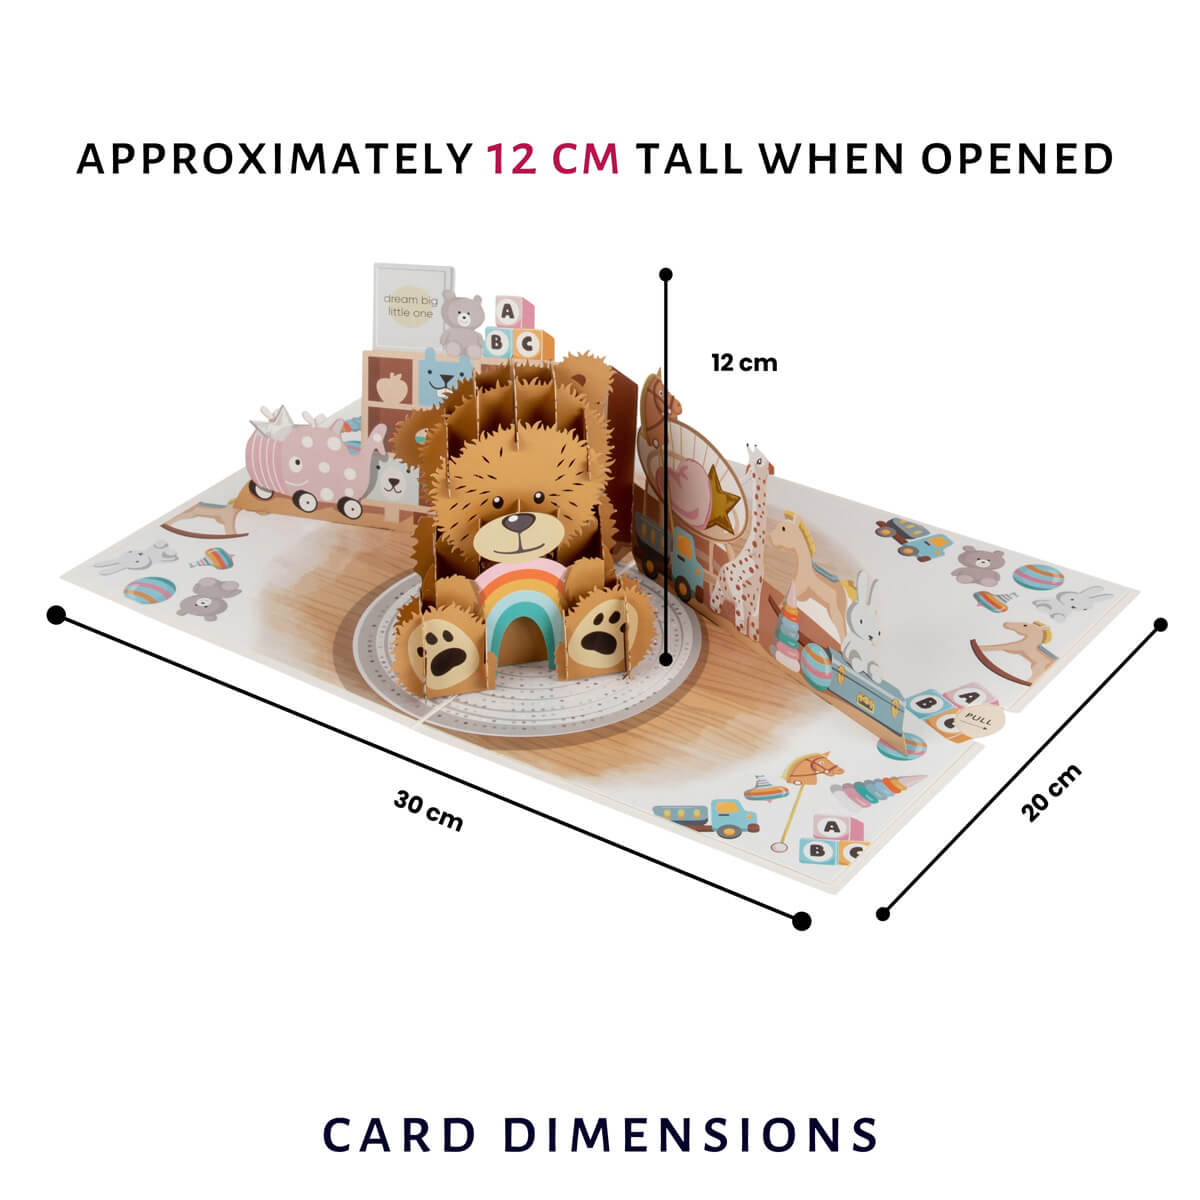 Image of Cardology New Baby Bear Pop Up Card dimensions which is 30cm (l) x 20cm (w) and 12cm (h) when opened.